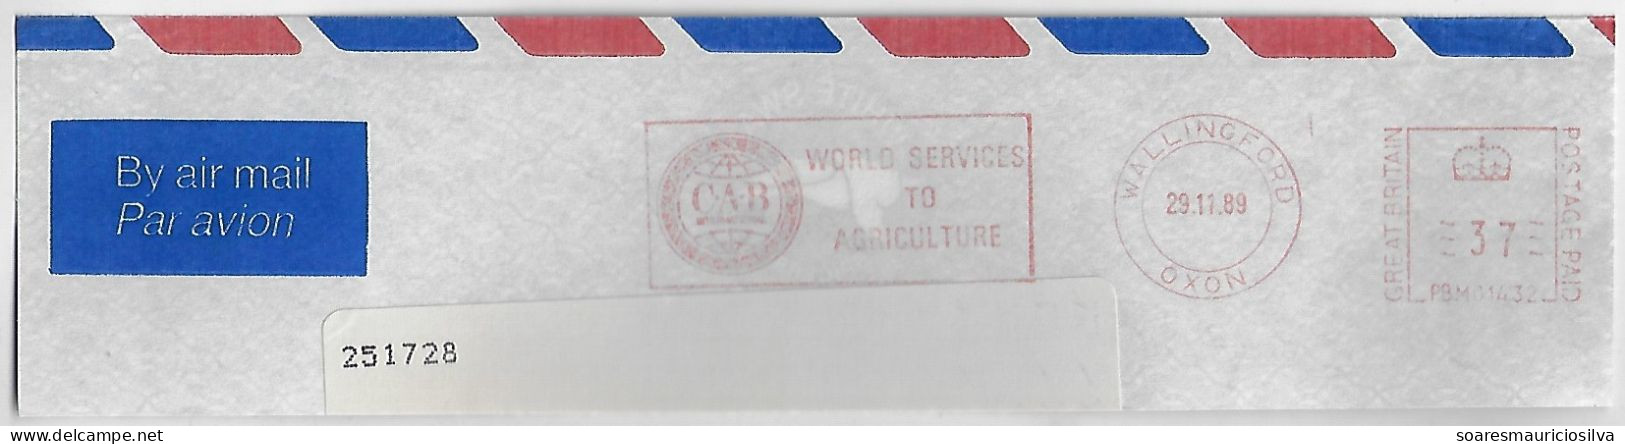 Great Britain 1989 Meter Stamp Pitney Bowes 5000 Slogan CAB International World Services To Agriculture Wallingford - Brieven En Documenten